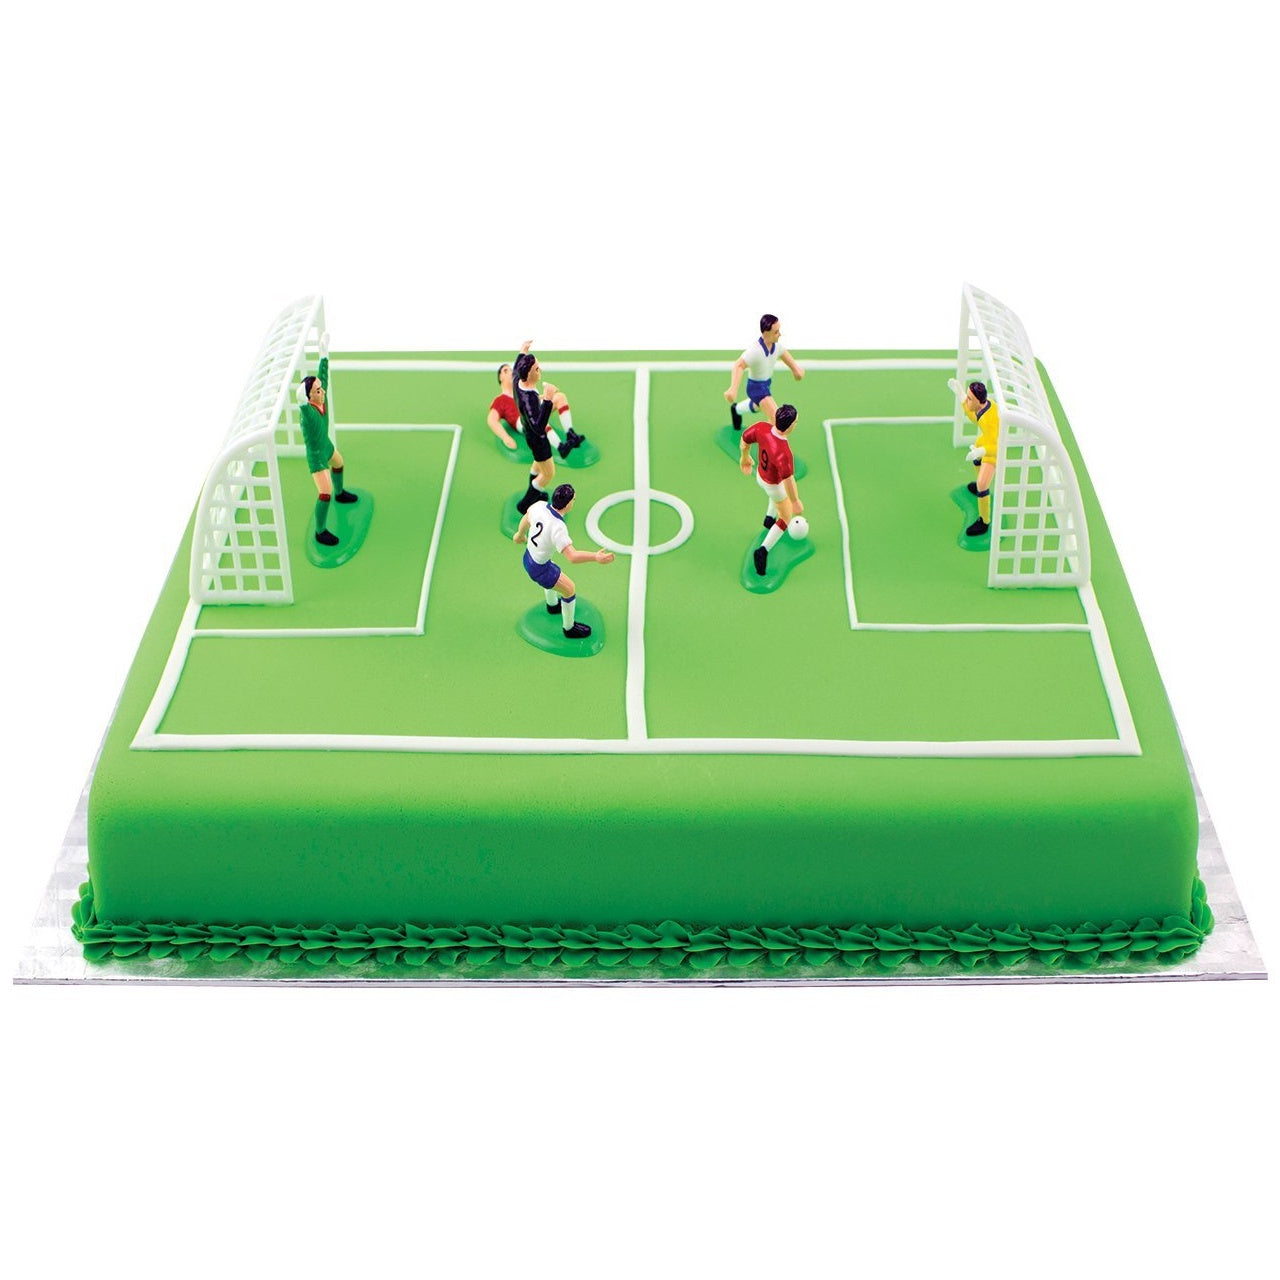 Soccer Players and Goals Cake Decorating Set